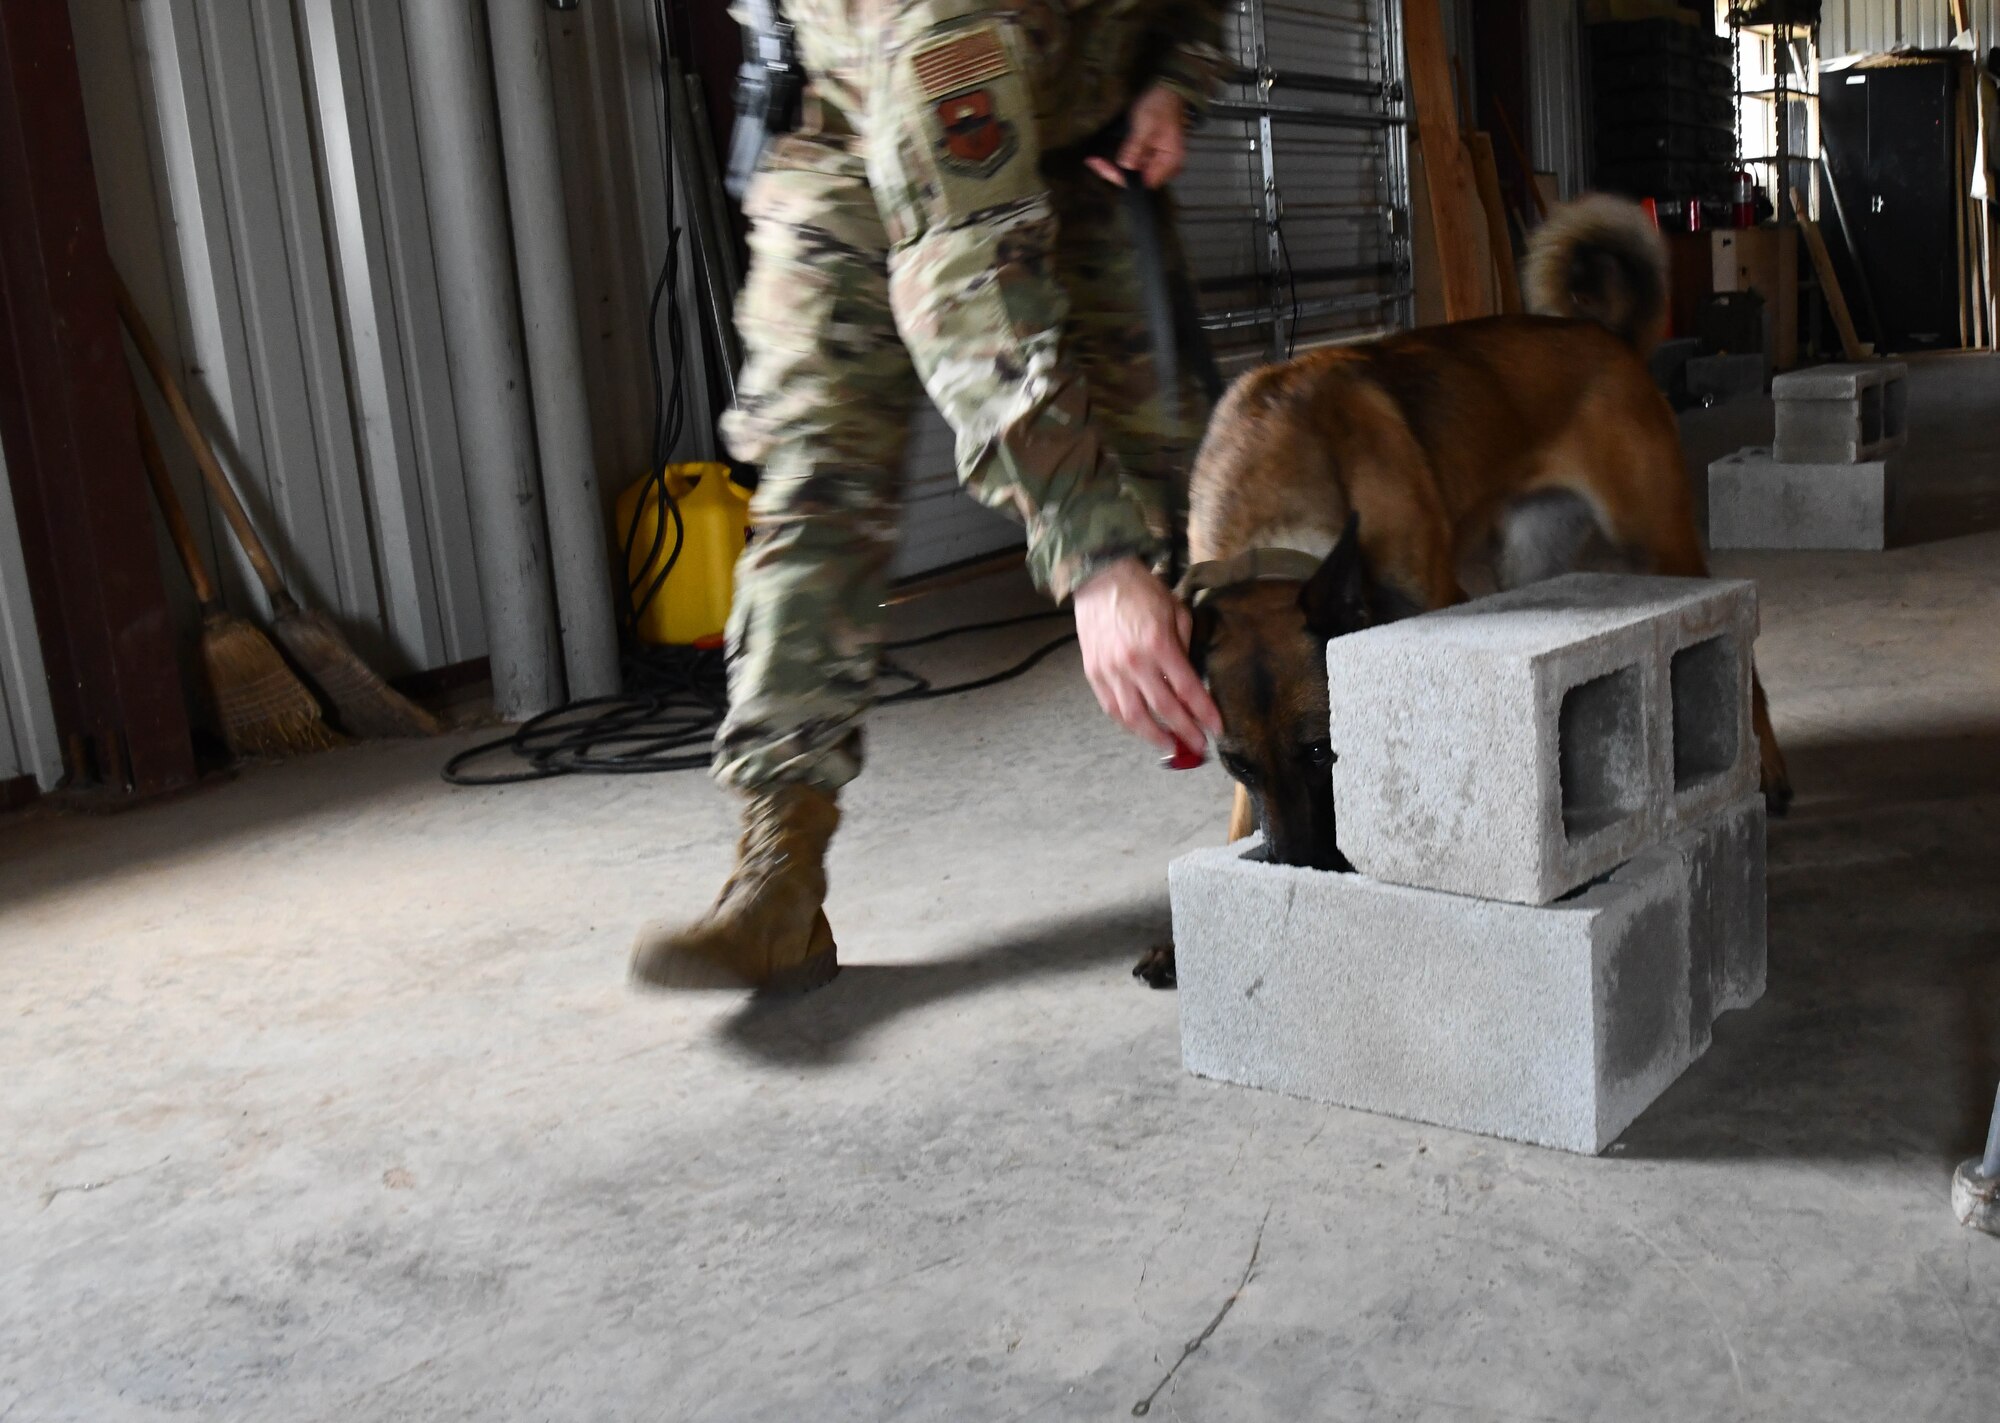 U.S Air Force Tech. Sgt. Joseph Teresi, NCO in charge of Military Working Dogs assigned to 97th Security Forces Squadron, guides his dog to search concrete blocks, Mar. 29, 2019, at Altus Air Force Base, Okla. Highly sensitive peroxide-based explosives are now routinely being used by terrorists, so canine training with these chemicals provides readiness in these situations.  (U.S. Air Force photo by Airman First Class Dallin Wrye)